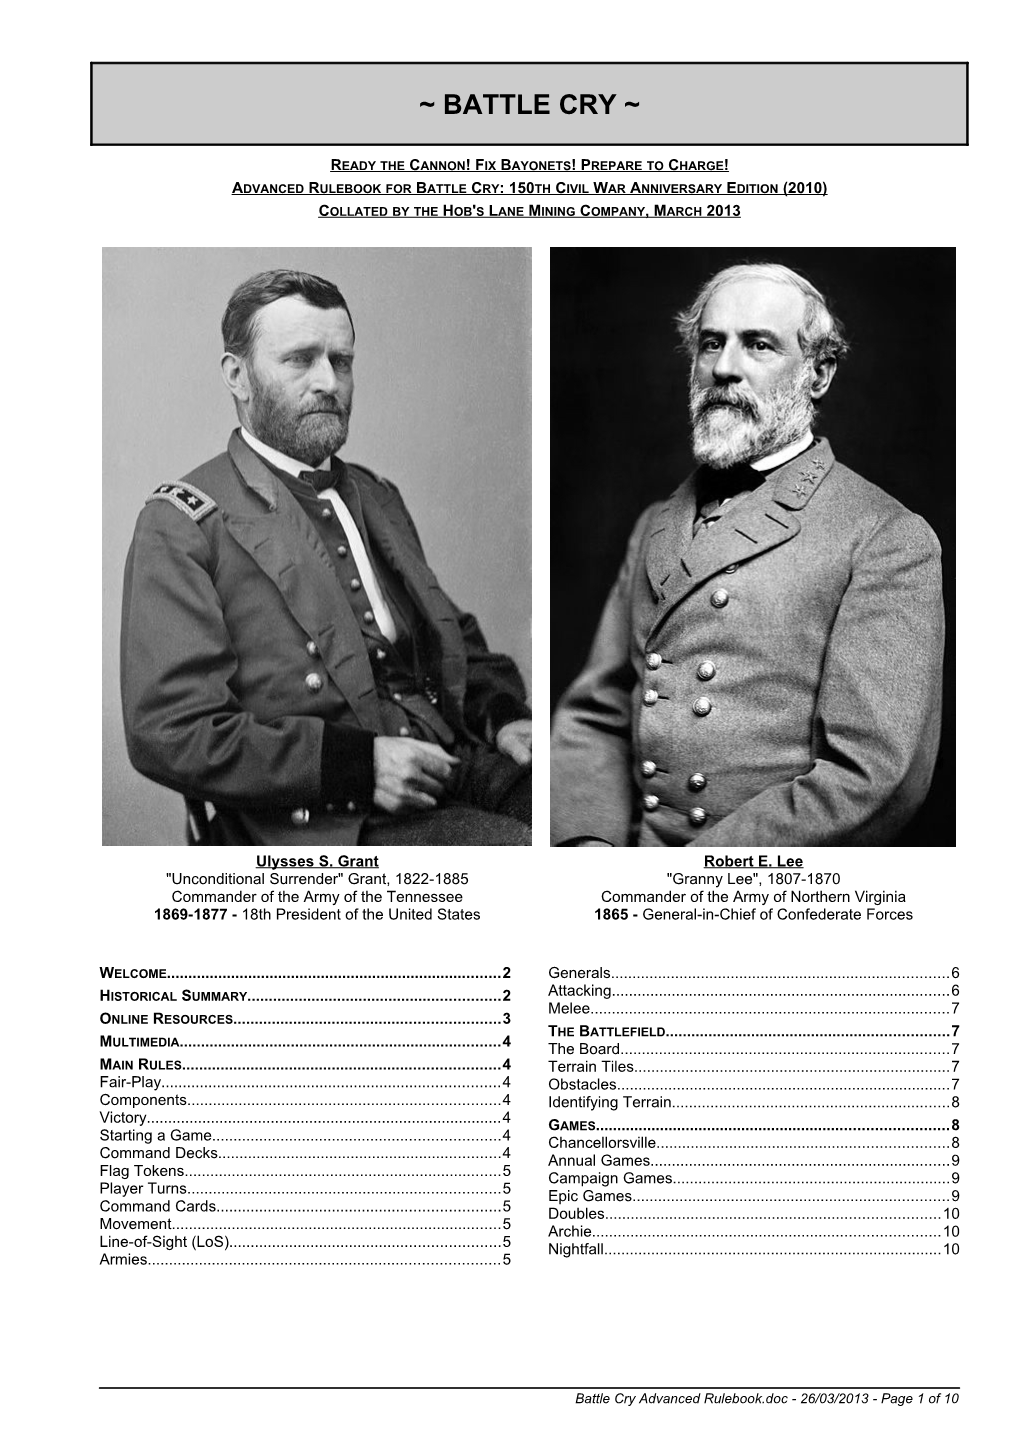 Advanced Rules for Battle Cry: 150Th Civil War Anniversary Edition (2010)